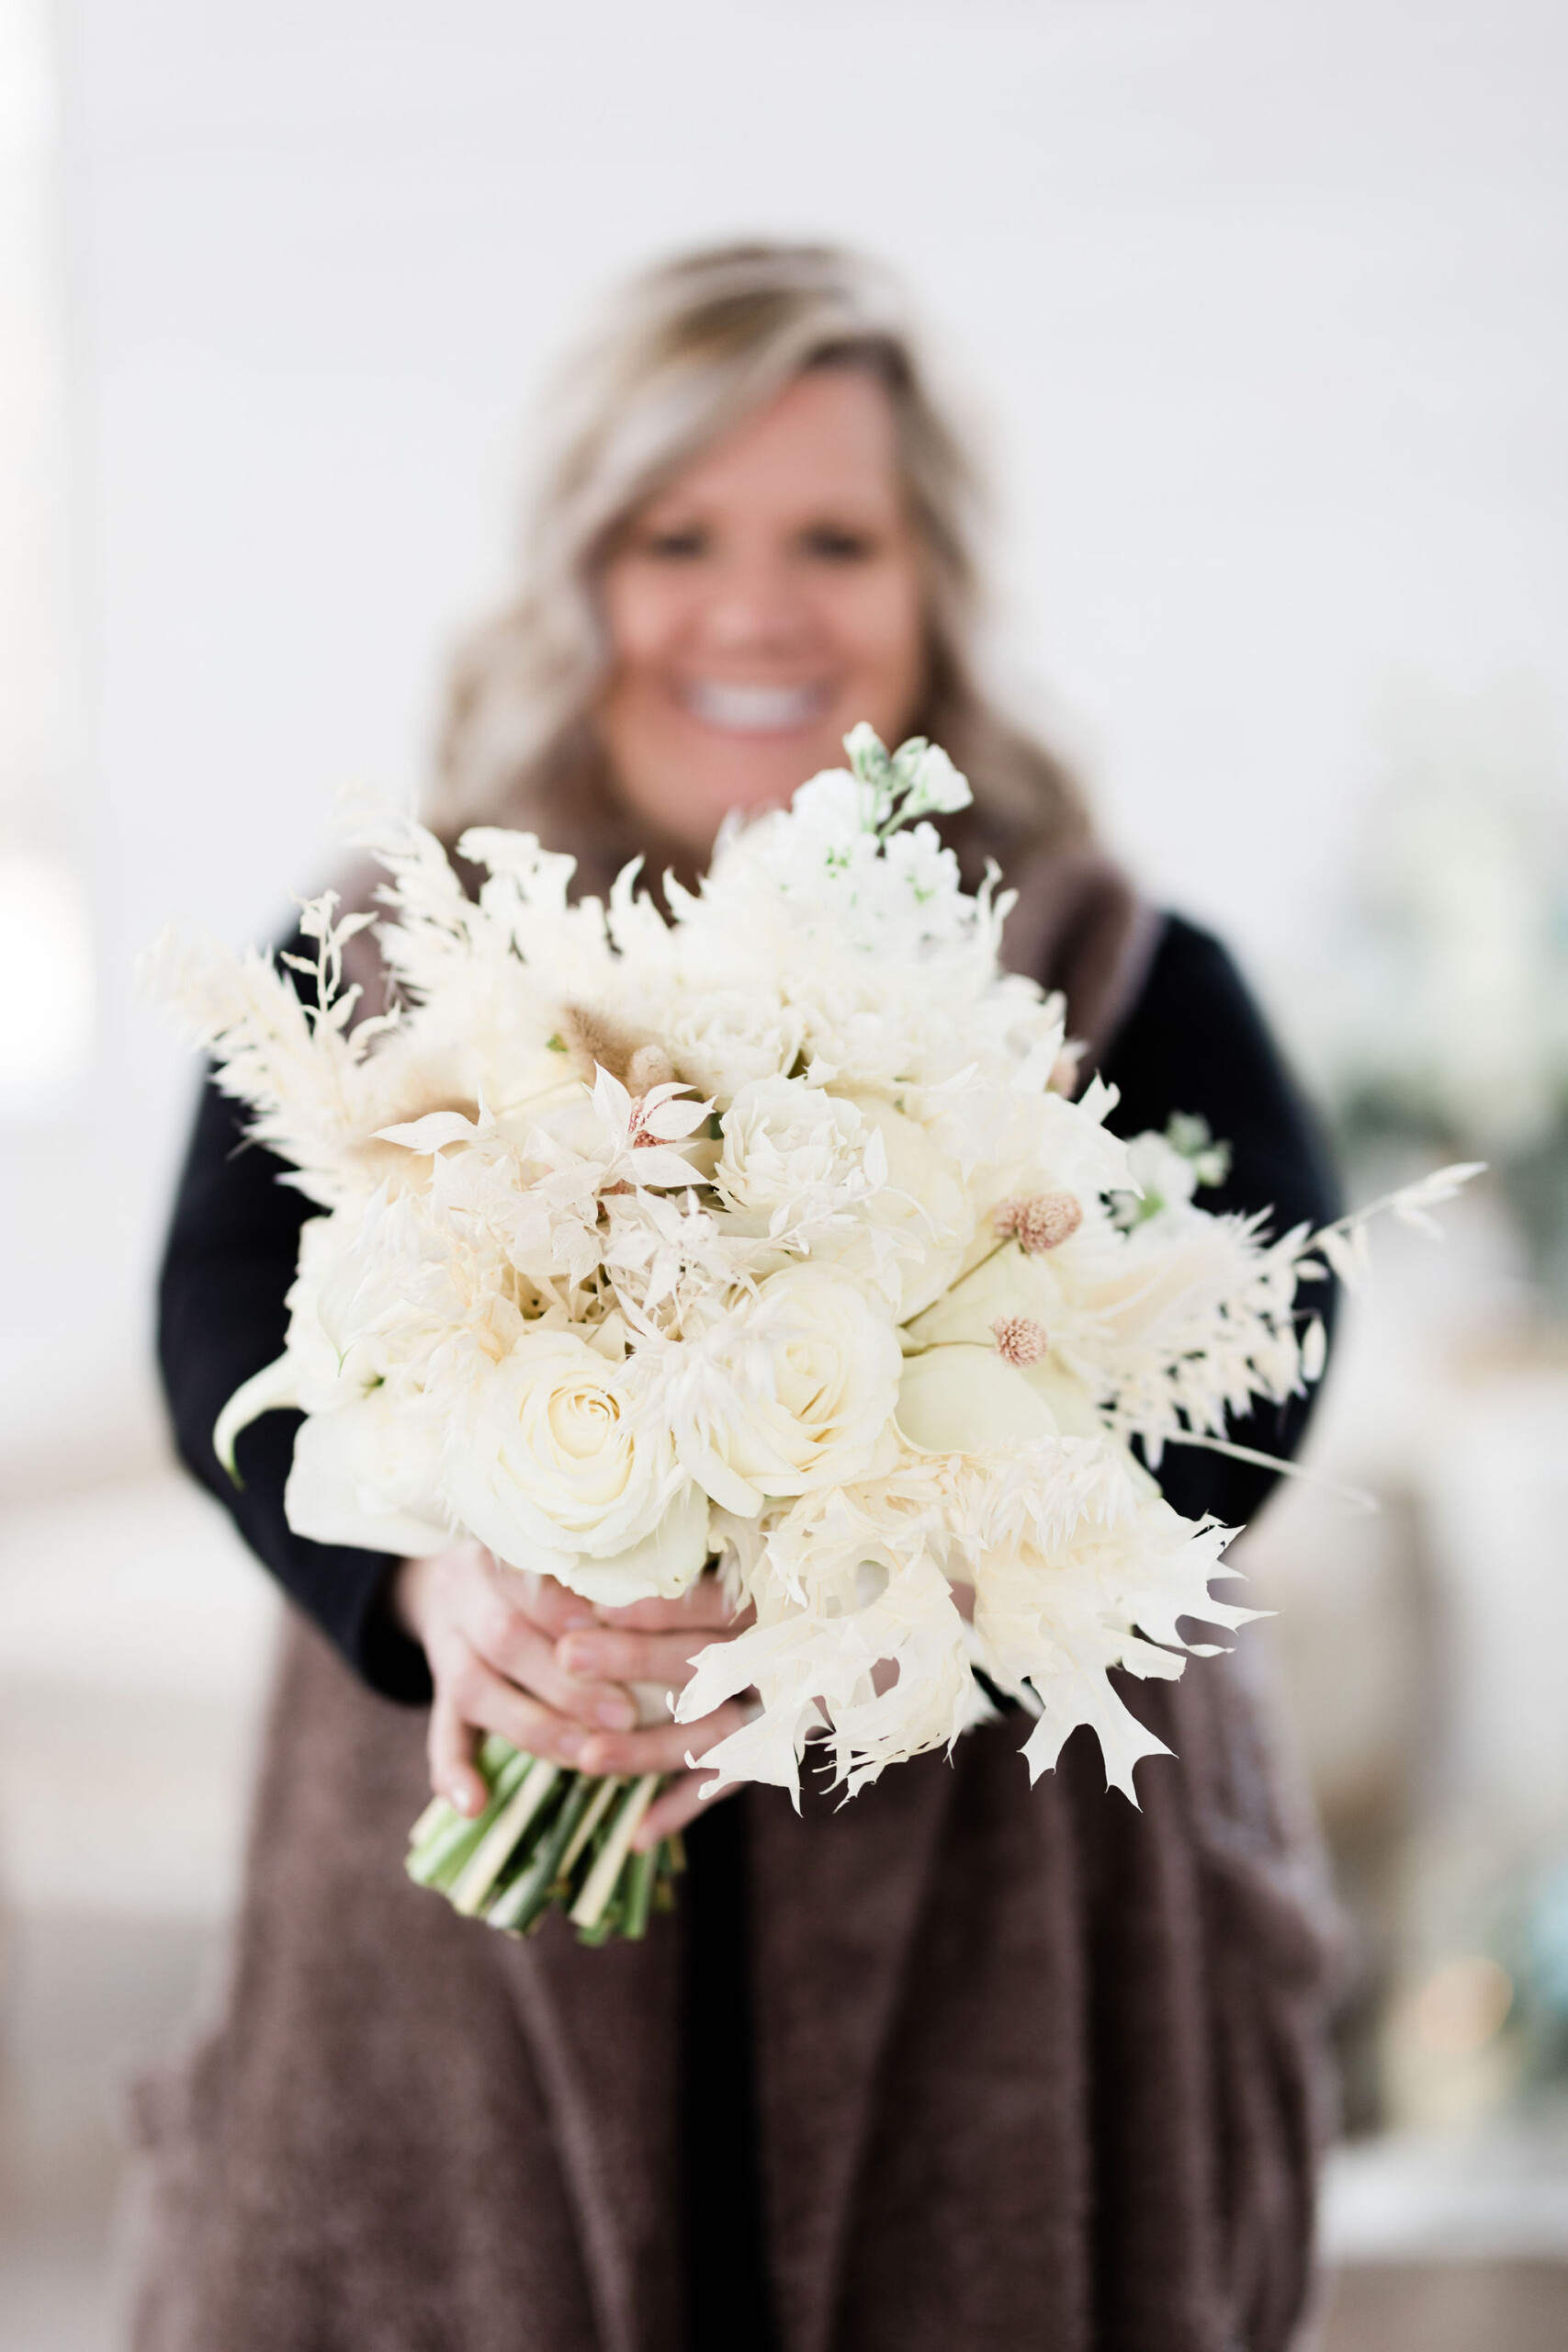 A Blooming Decision: How to Choose the Perfect Wedding Florist